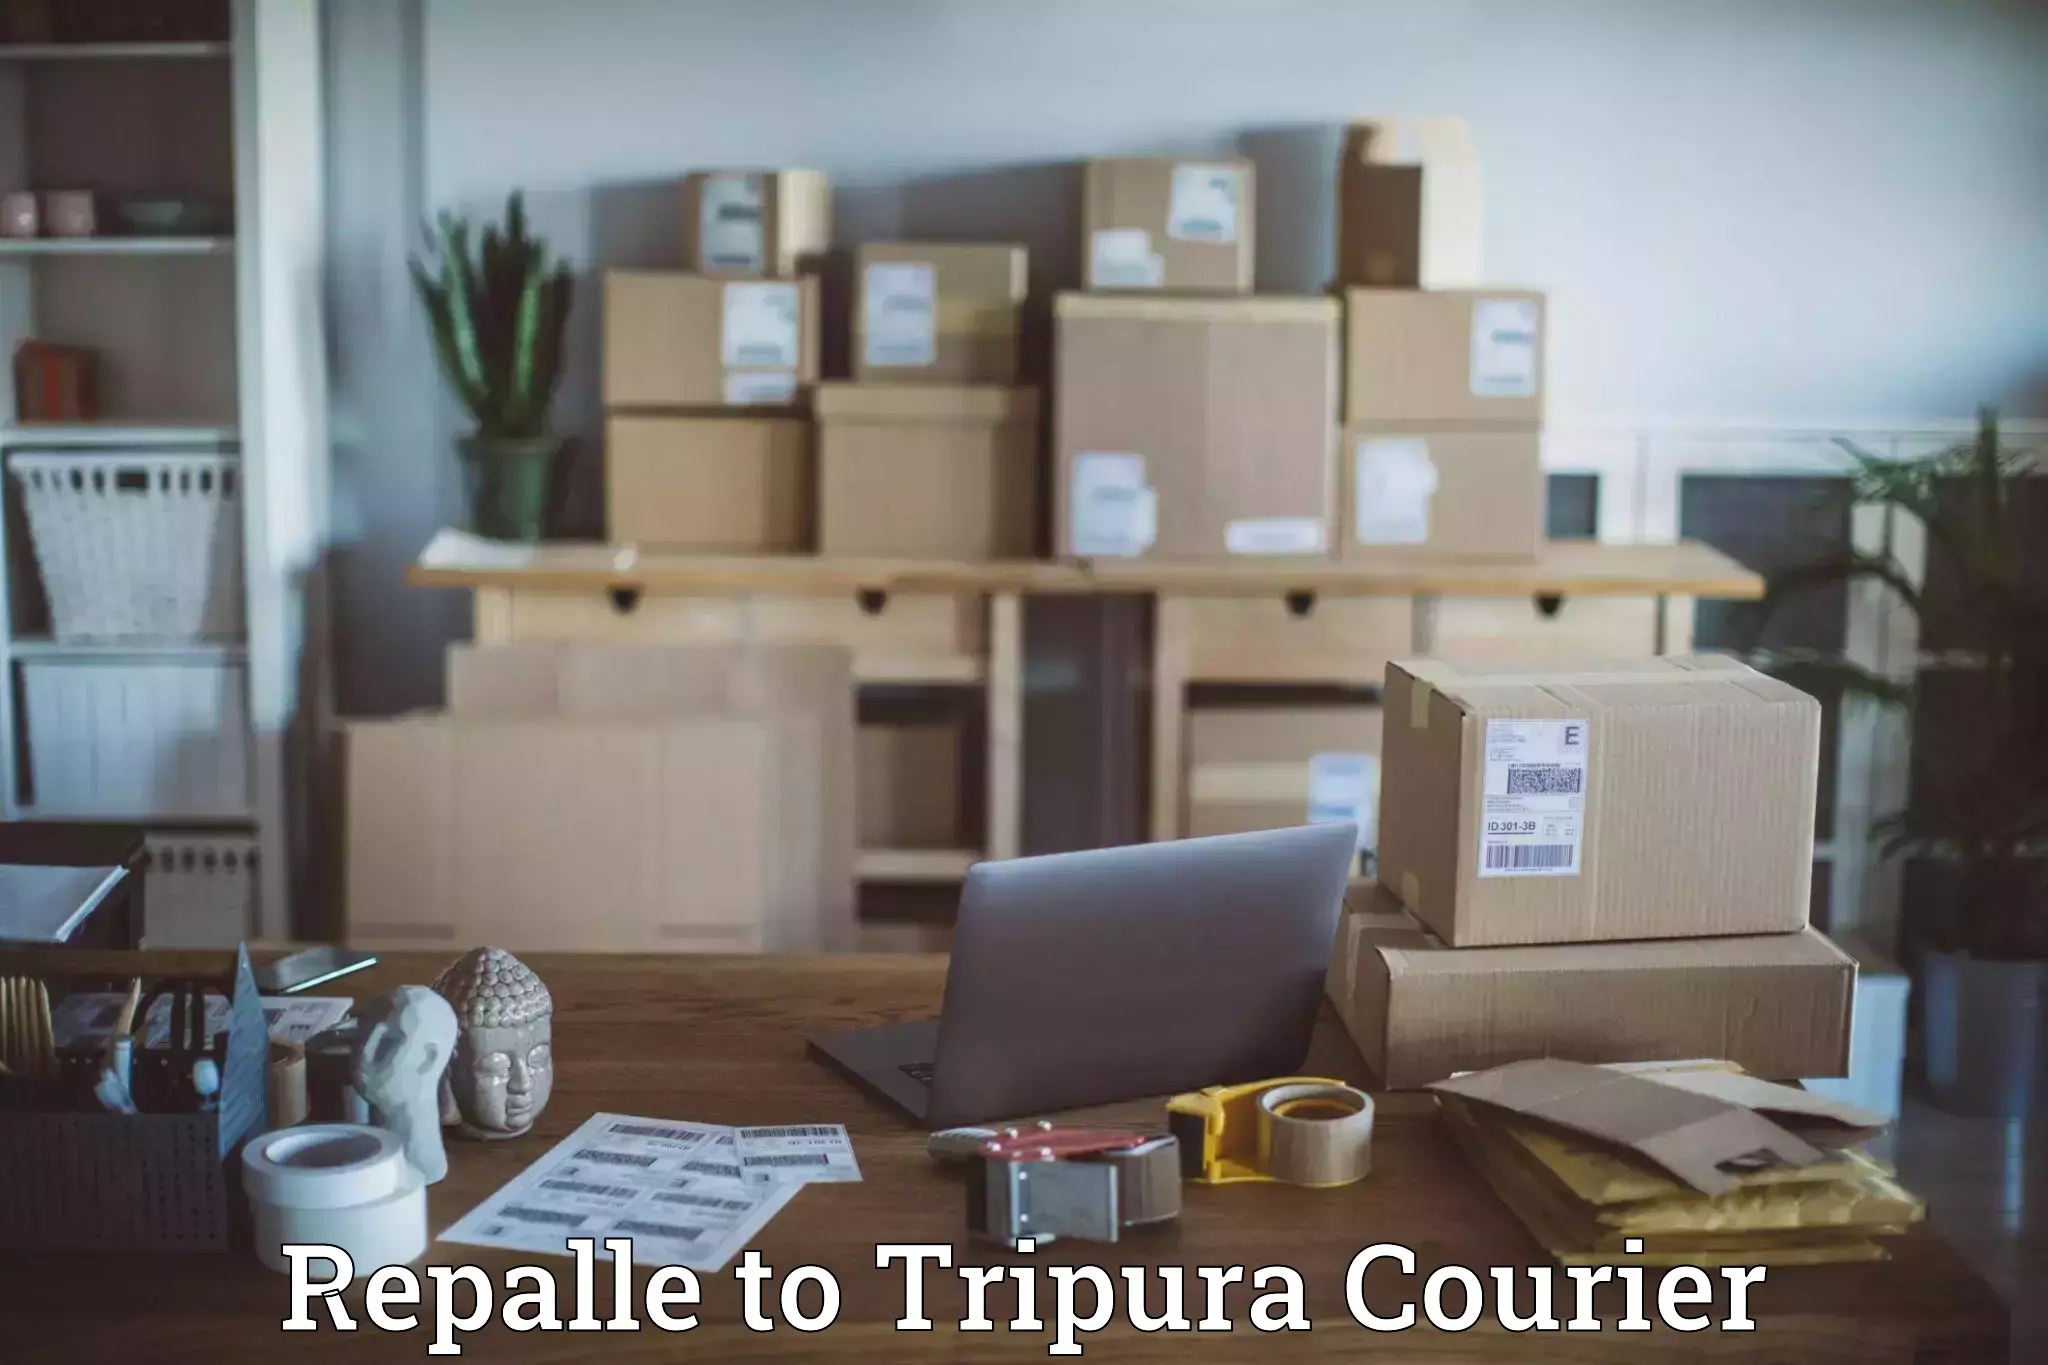 Local courier options Repalle to Udaipur Tripura